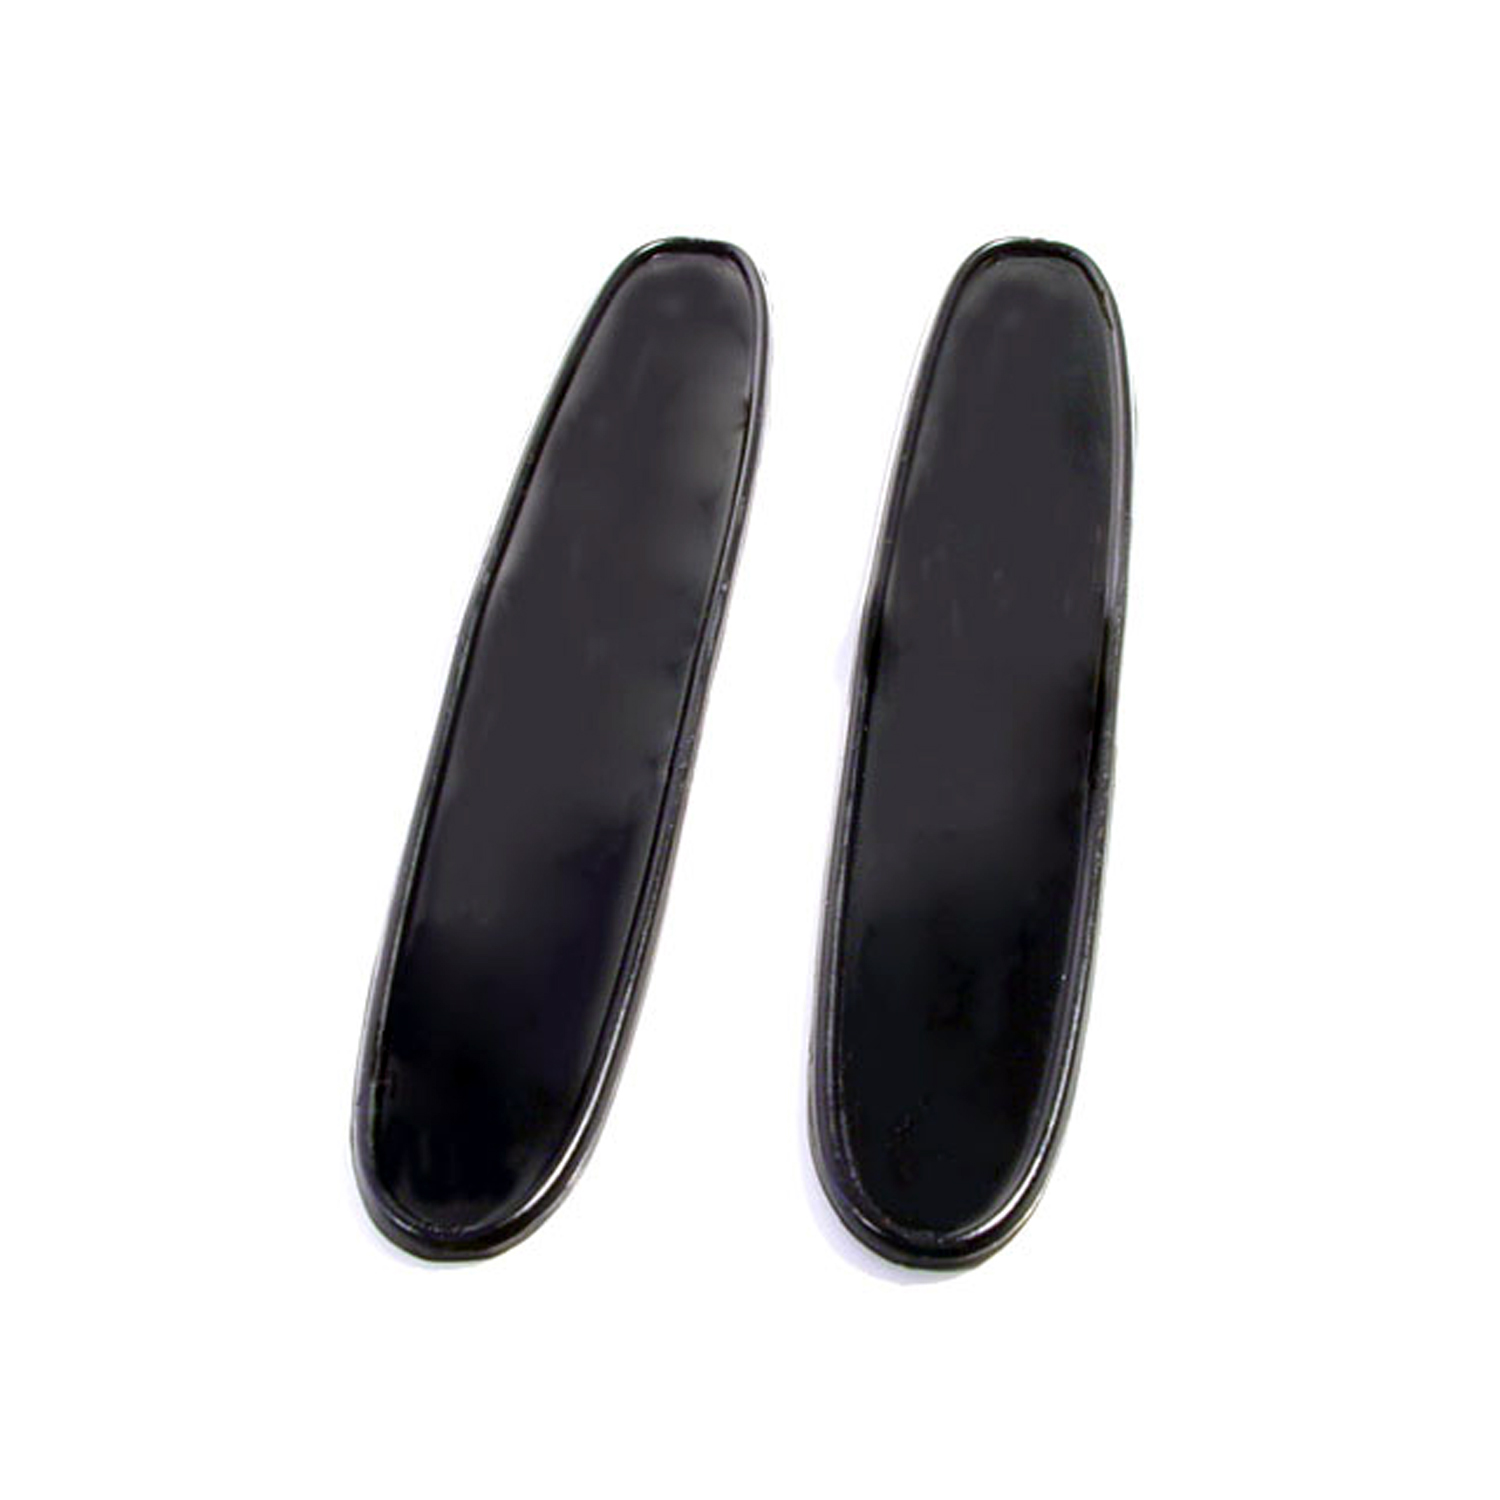 1939 Buick Century Series 60 Trunk Hinge Pads.  1-1/2 wide X 8-1/2 long.  Pair-MP 336-E